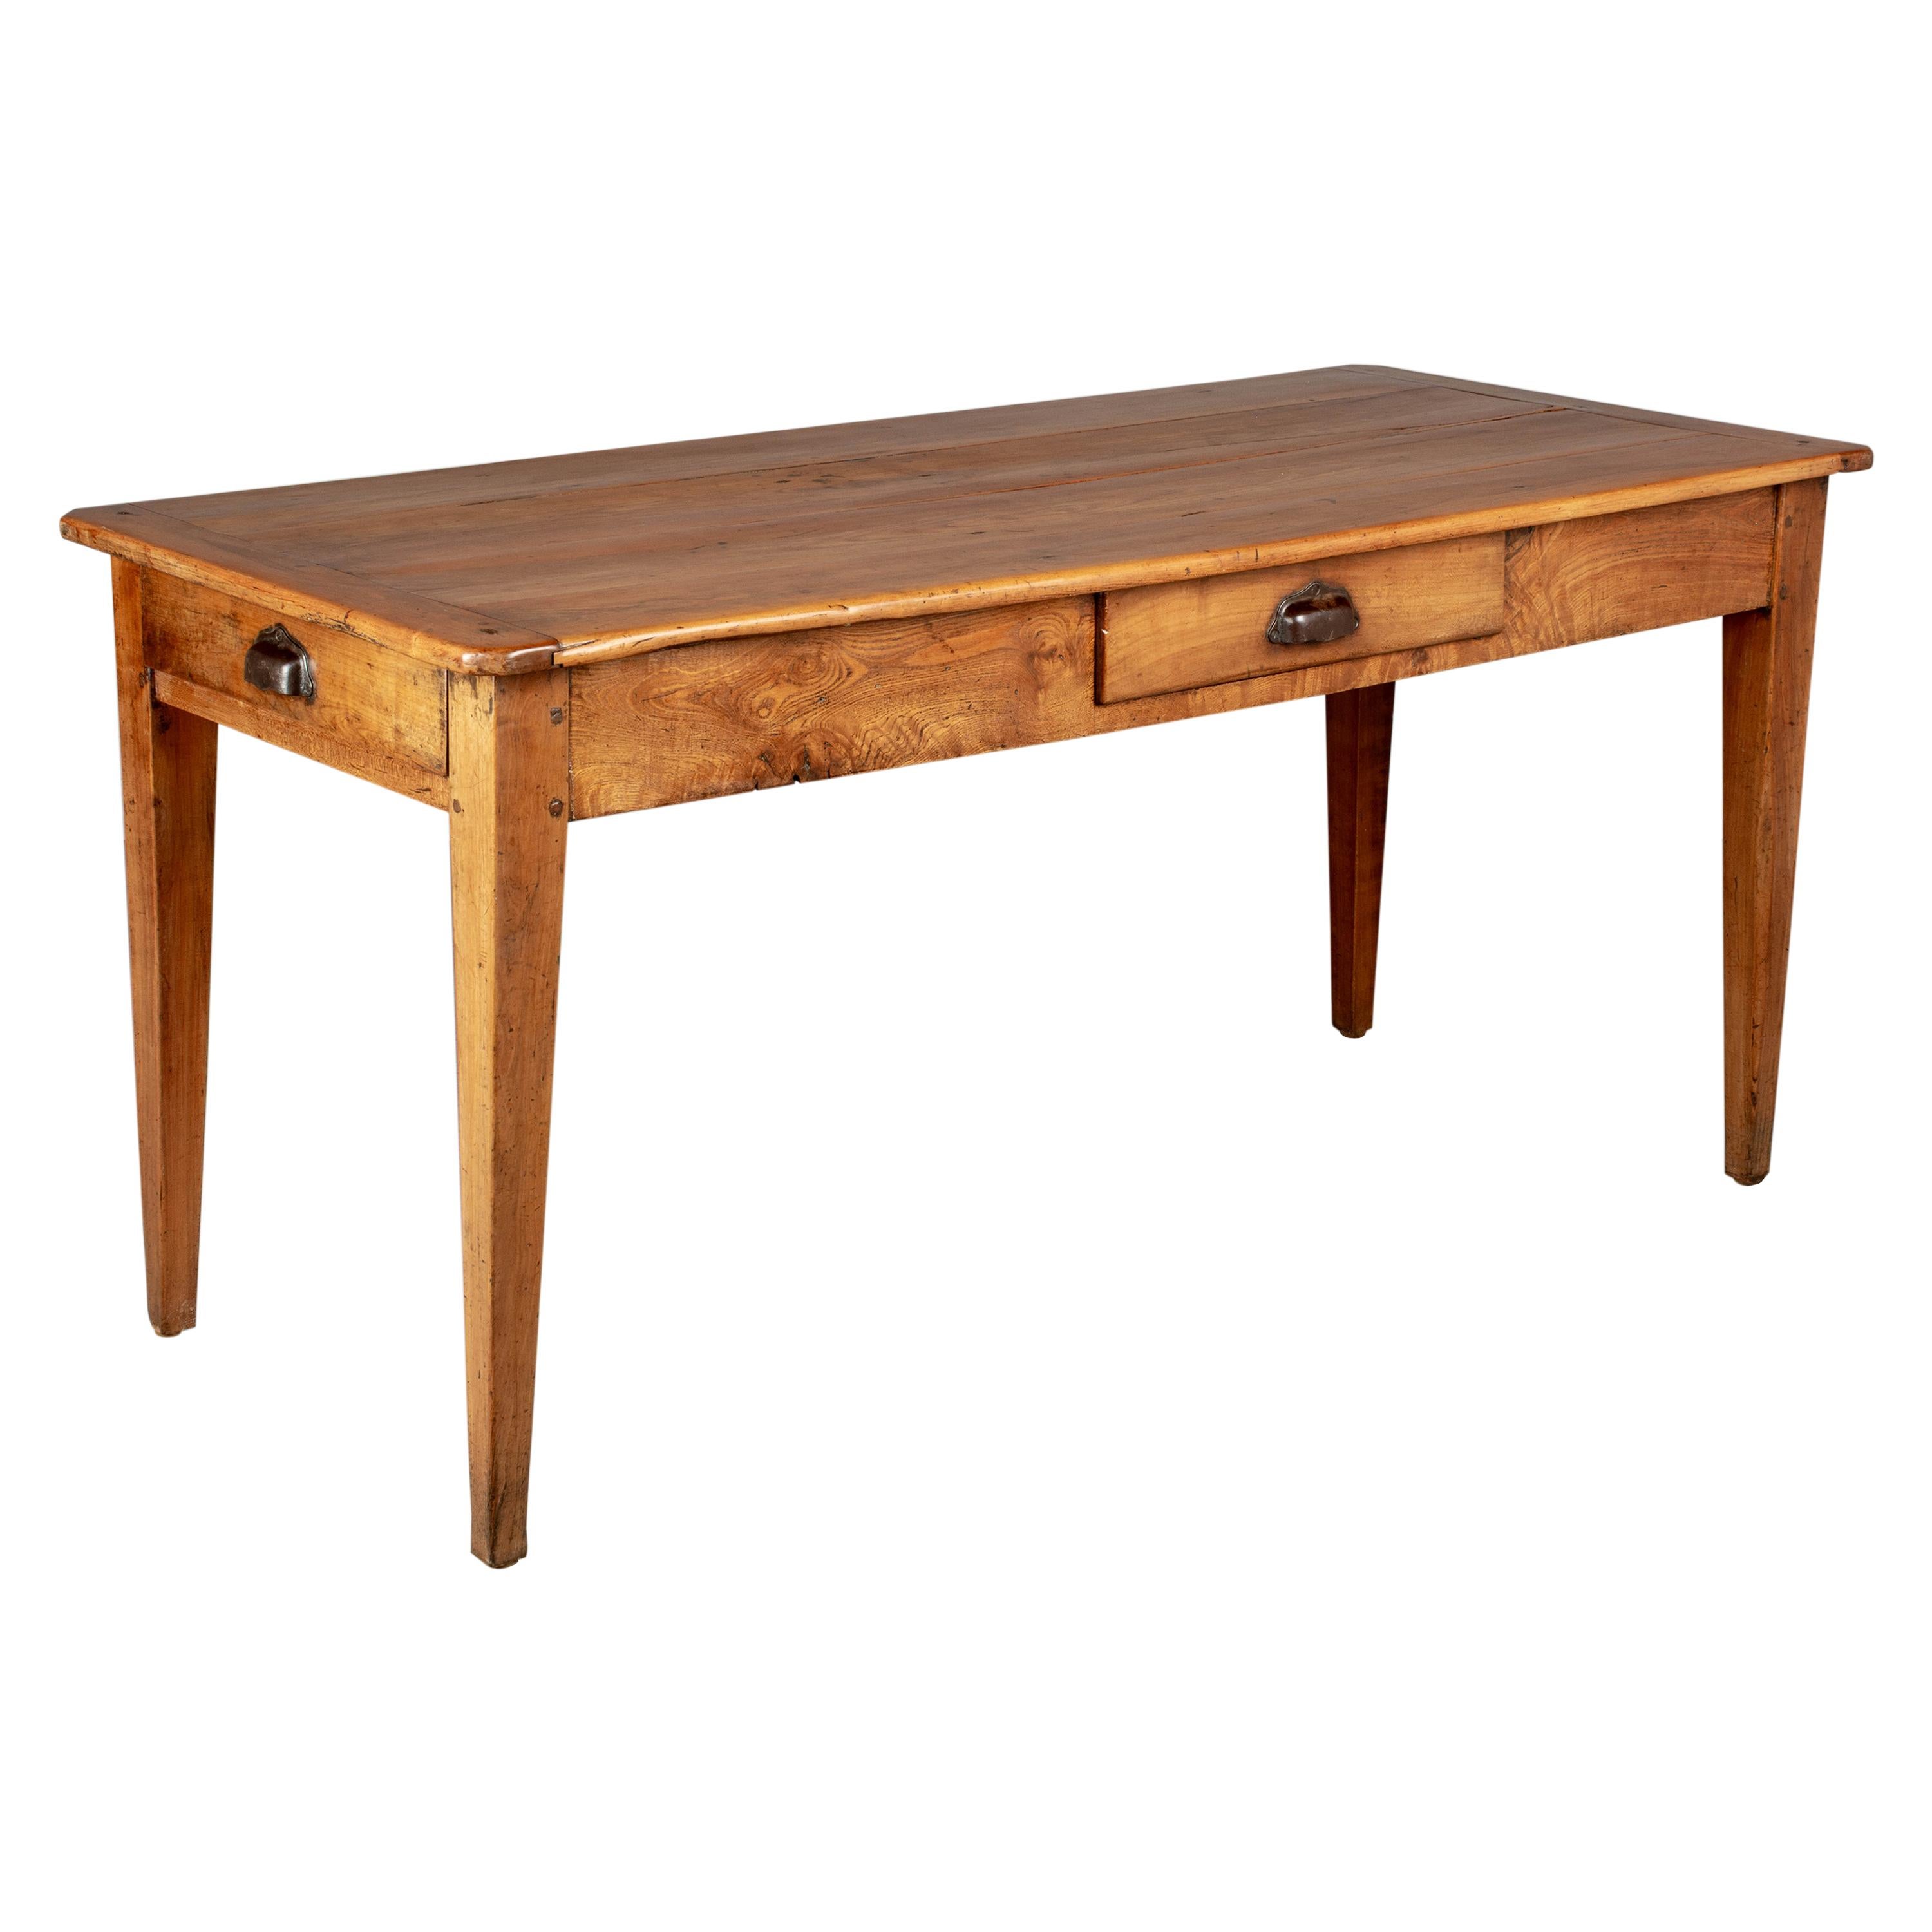 Country French Farm Table or Dining Table